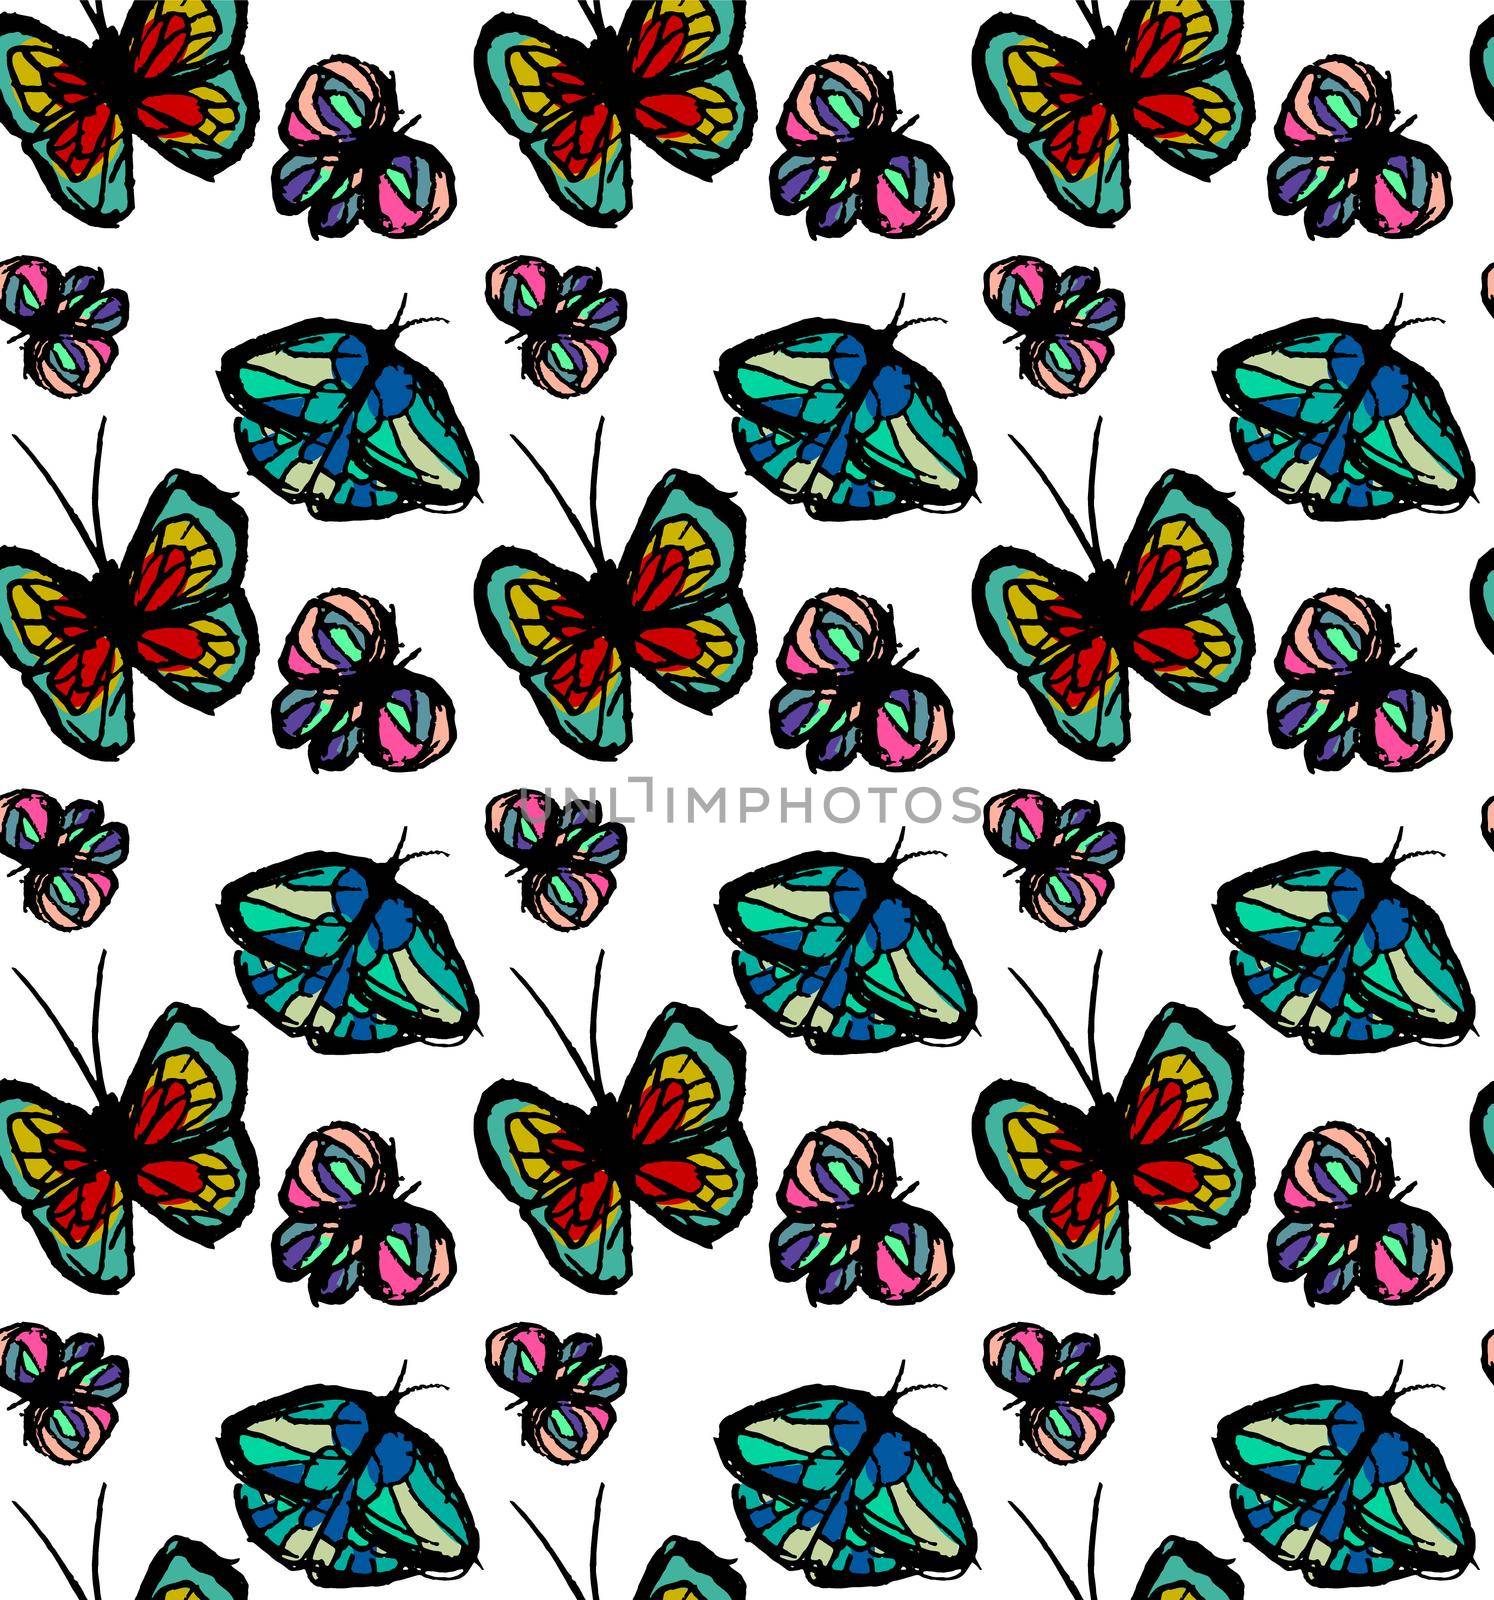 bright pattern with butterflies. Paints paint, hand drawn butterflies. Pattern for textiles. Girlish background